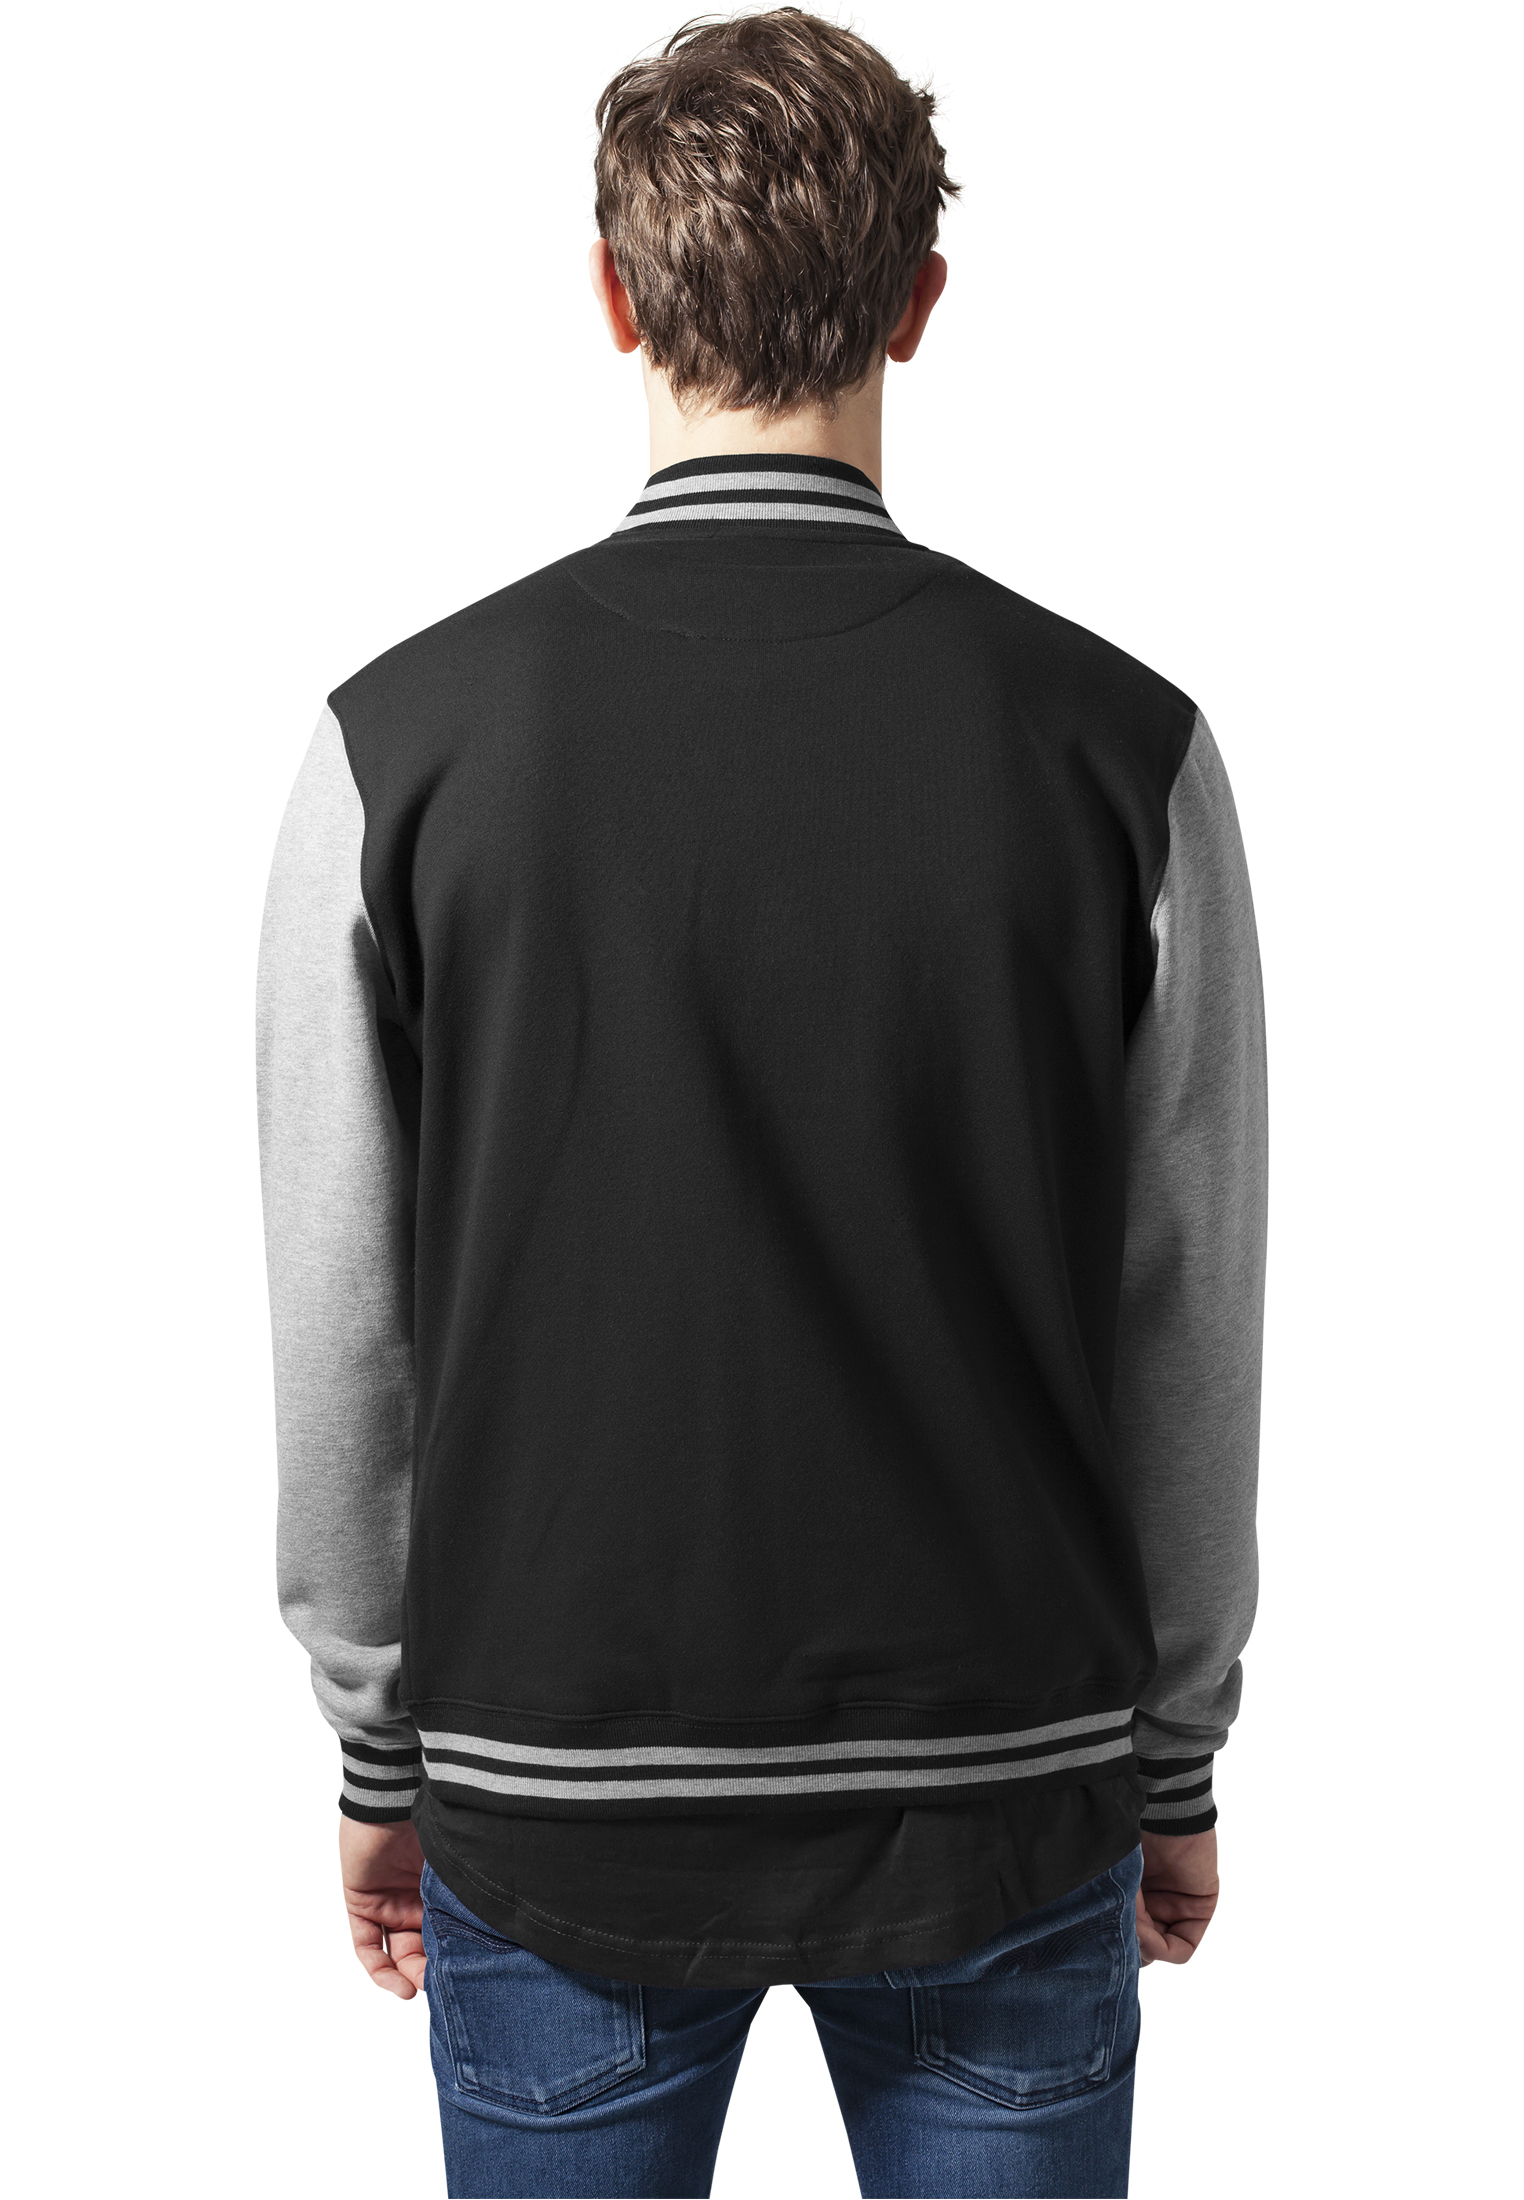 College Jacken 2-tone College Sweatjacket in Farbe blk/gry